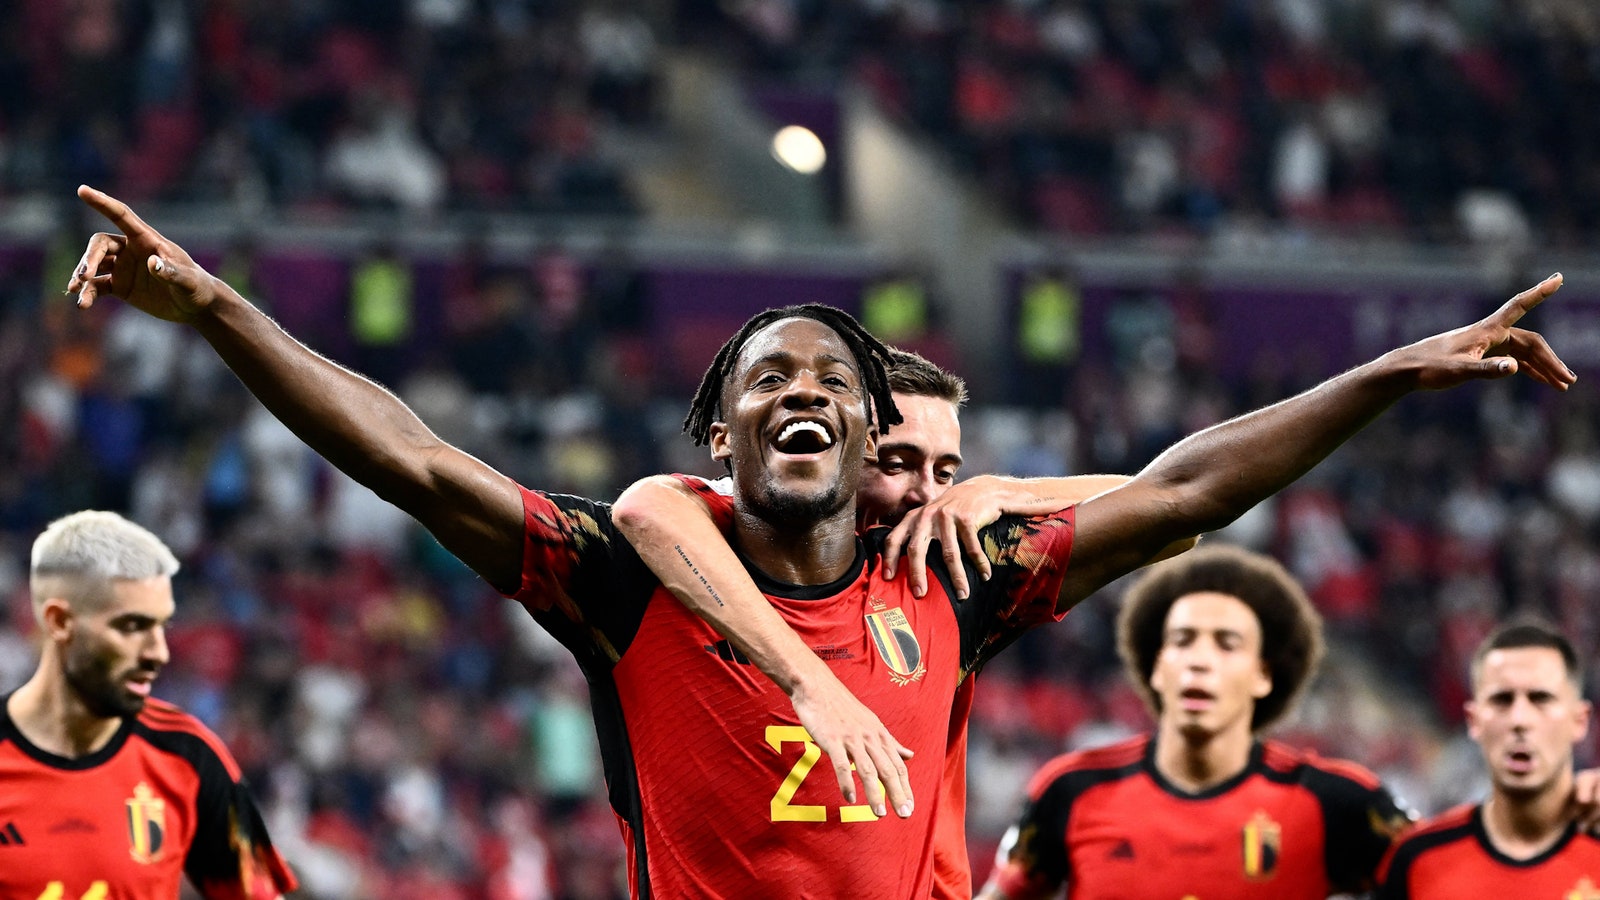 Belgium's Michy Batshuayi scores against Canada in the 44th minute.